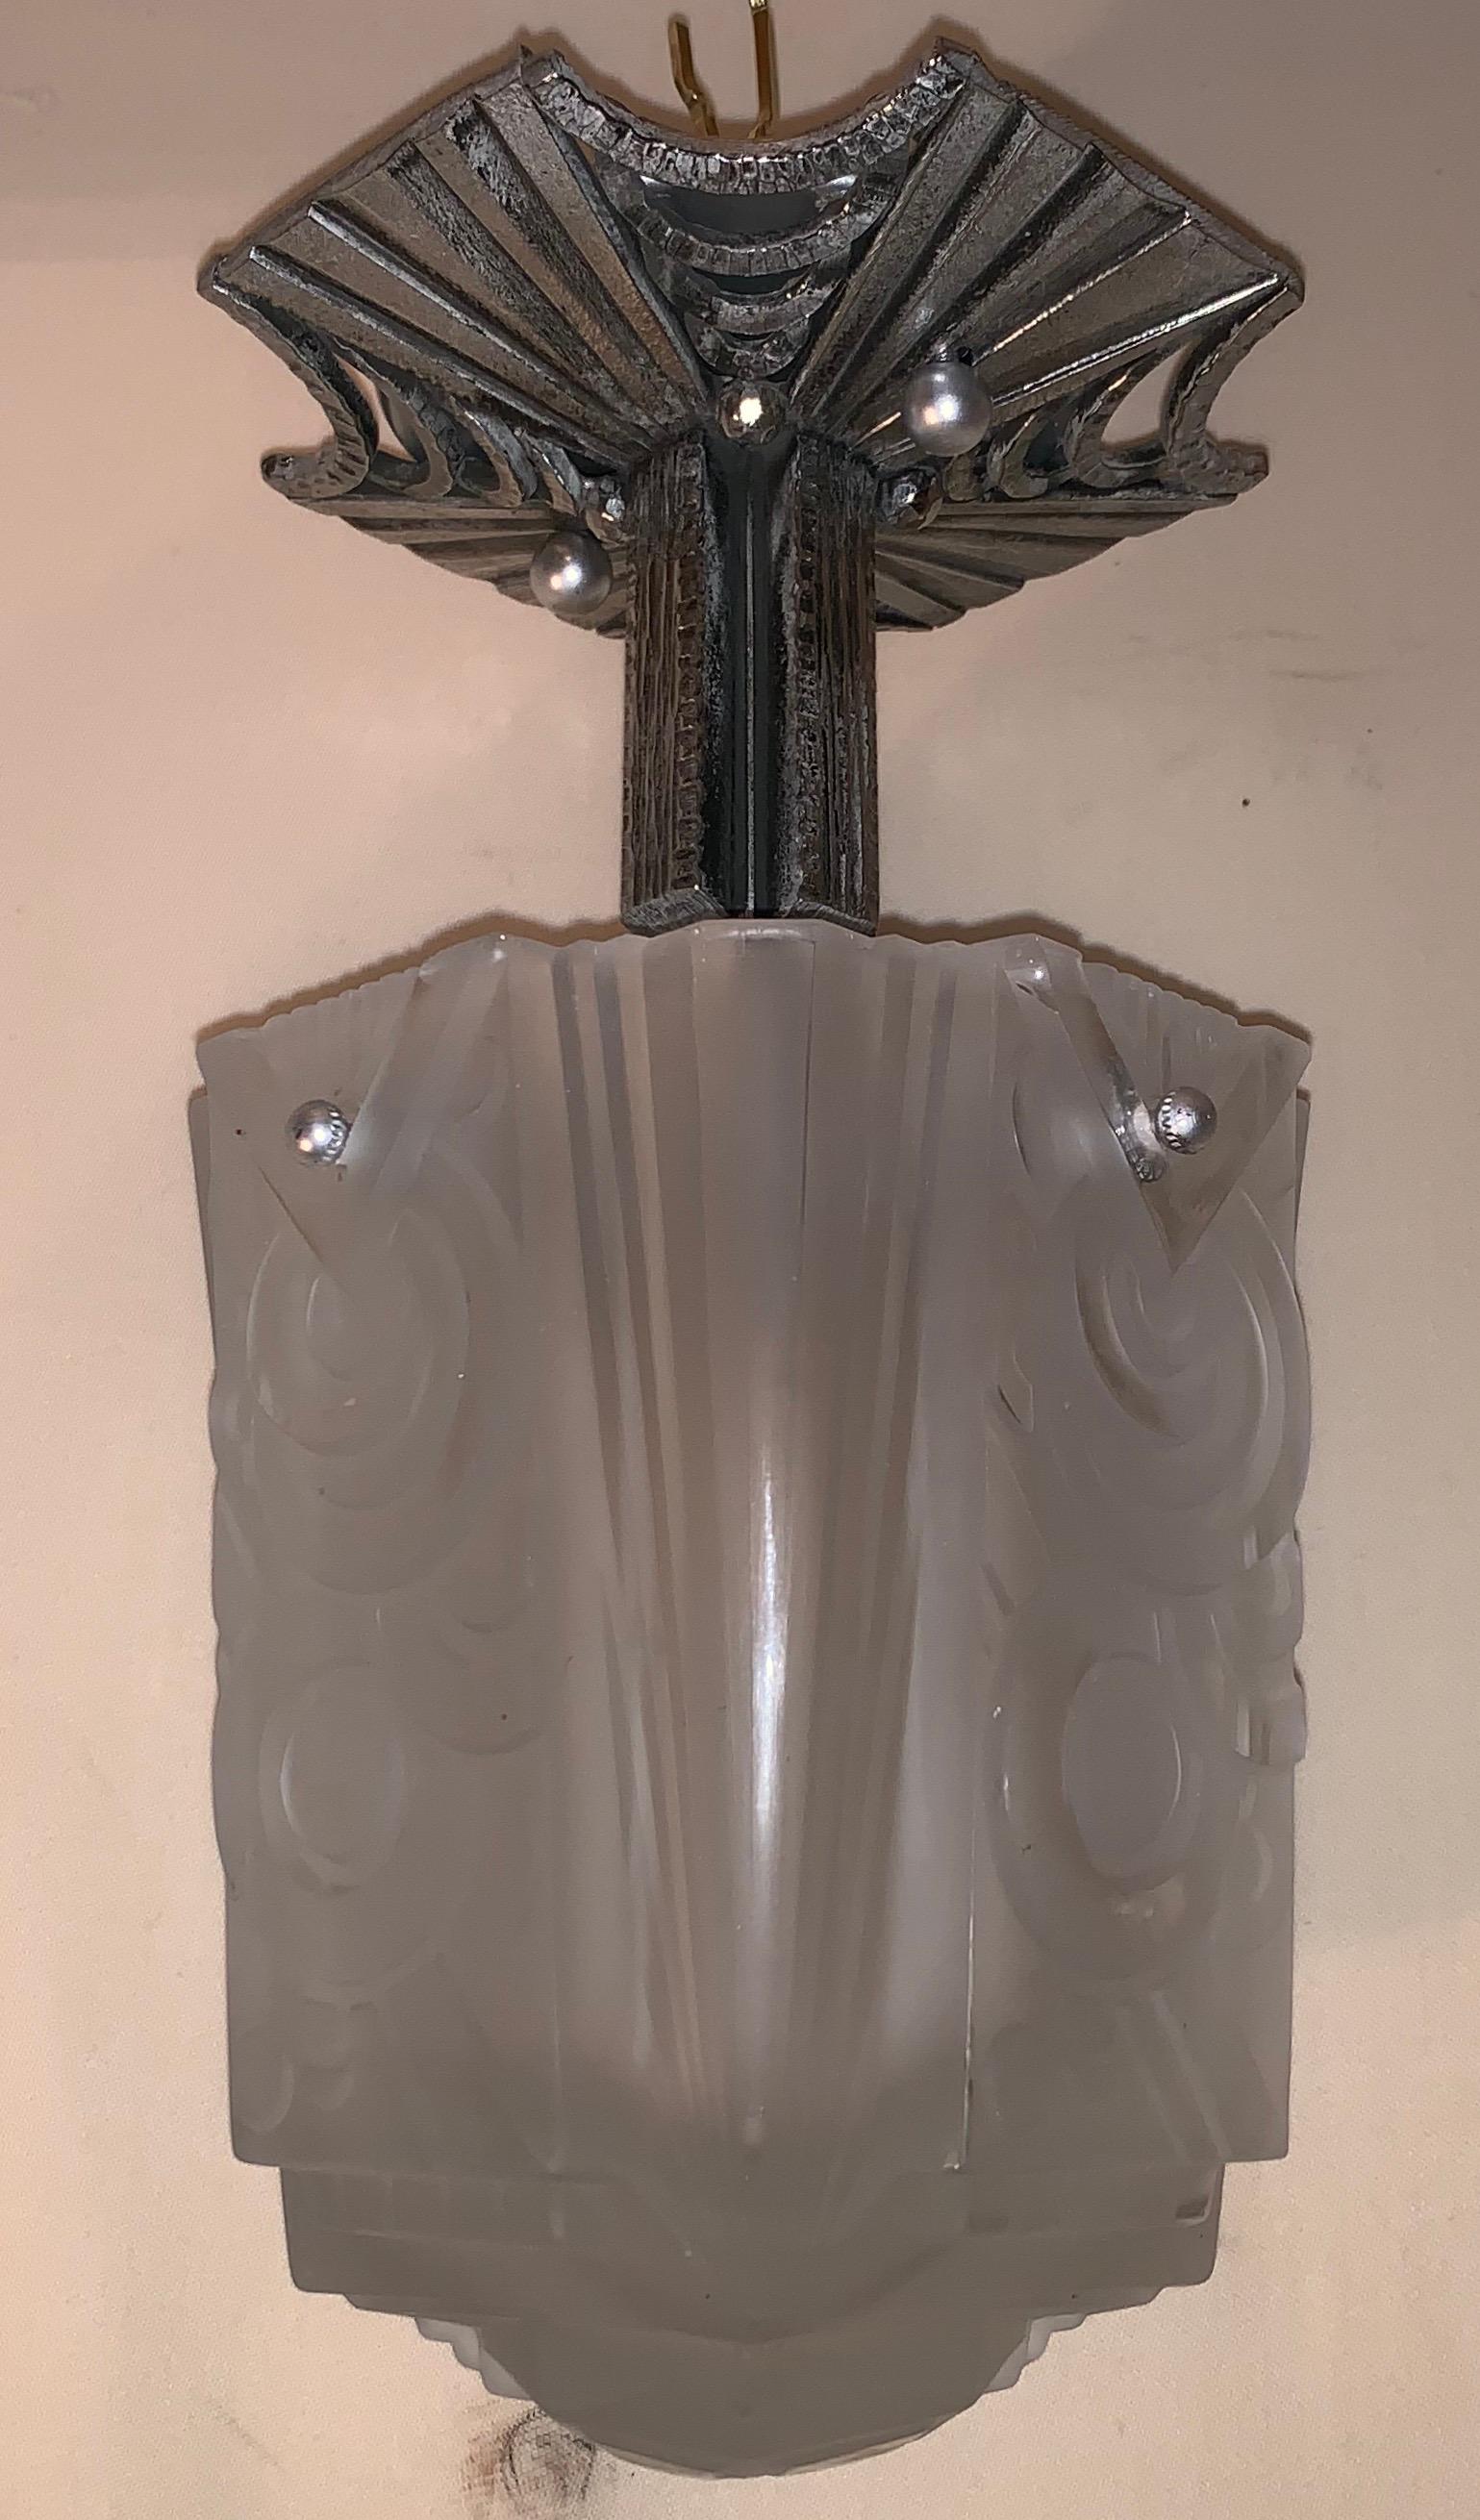 A wonderful French silvered bronze art deco & frost glass shade flush mount light fixture, with one candelabra light inside taking up to 60 watts. In the manner of Muller Frères.